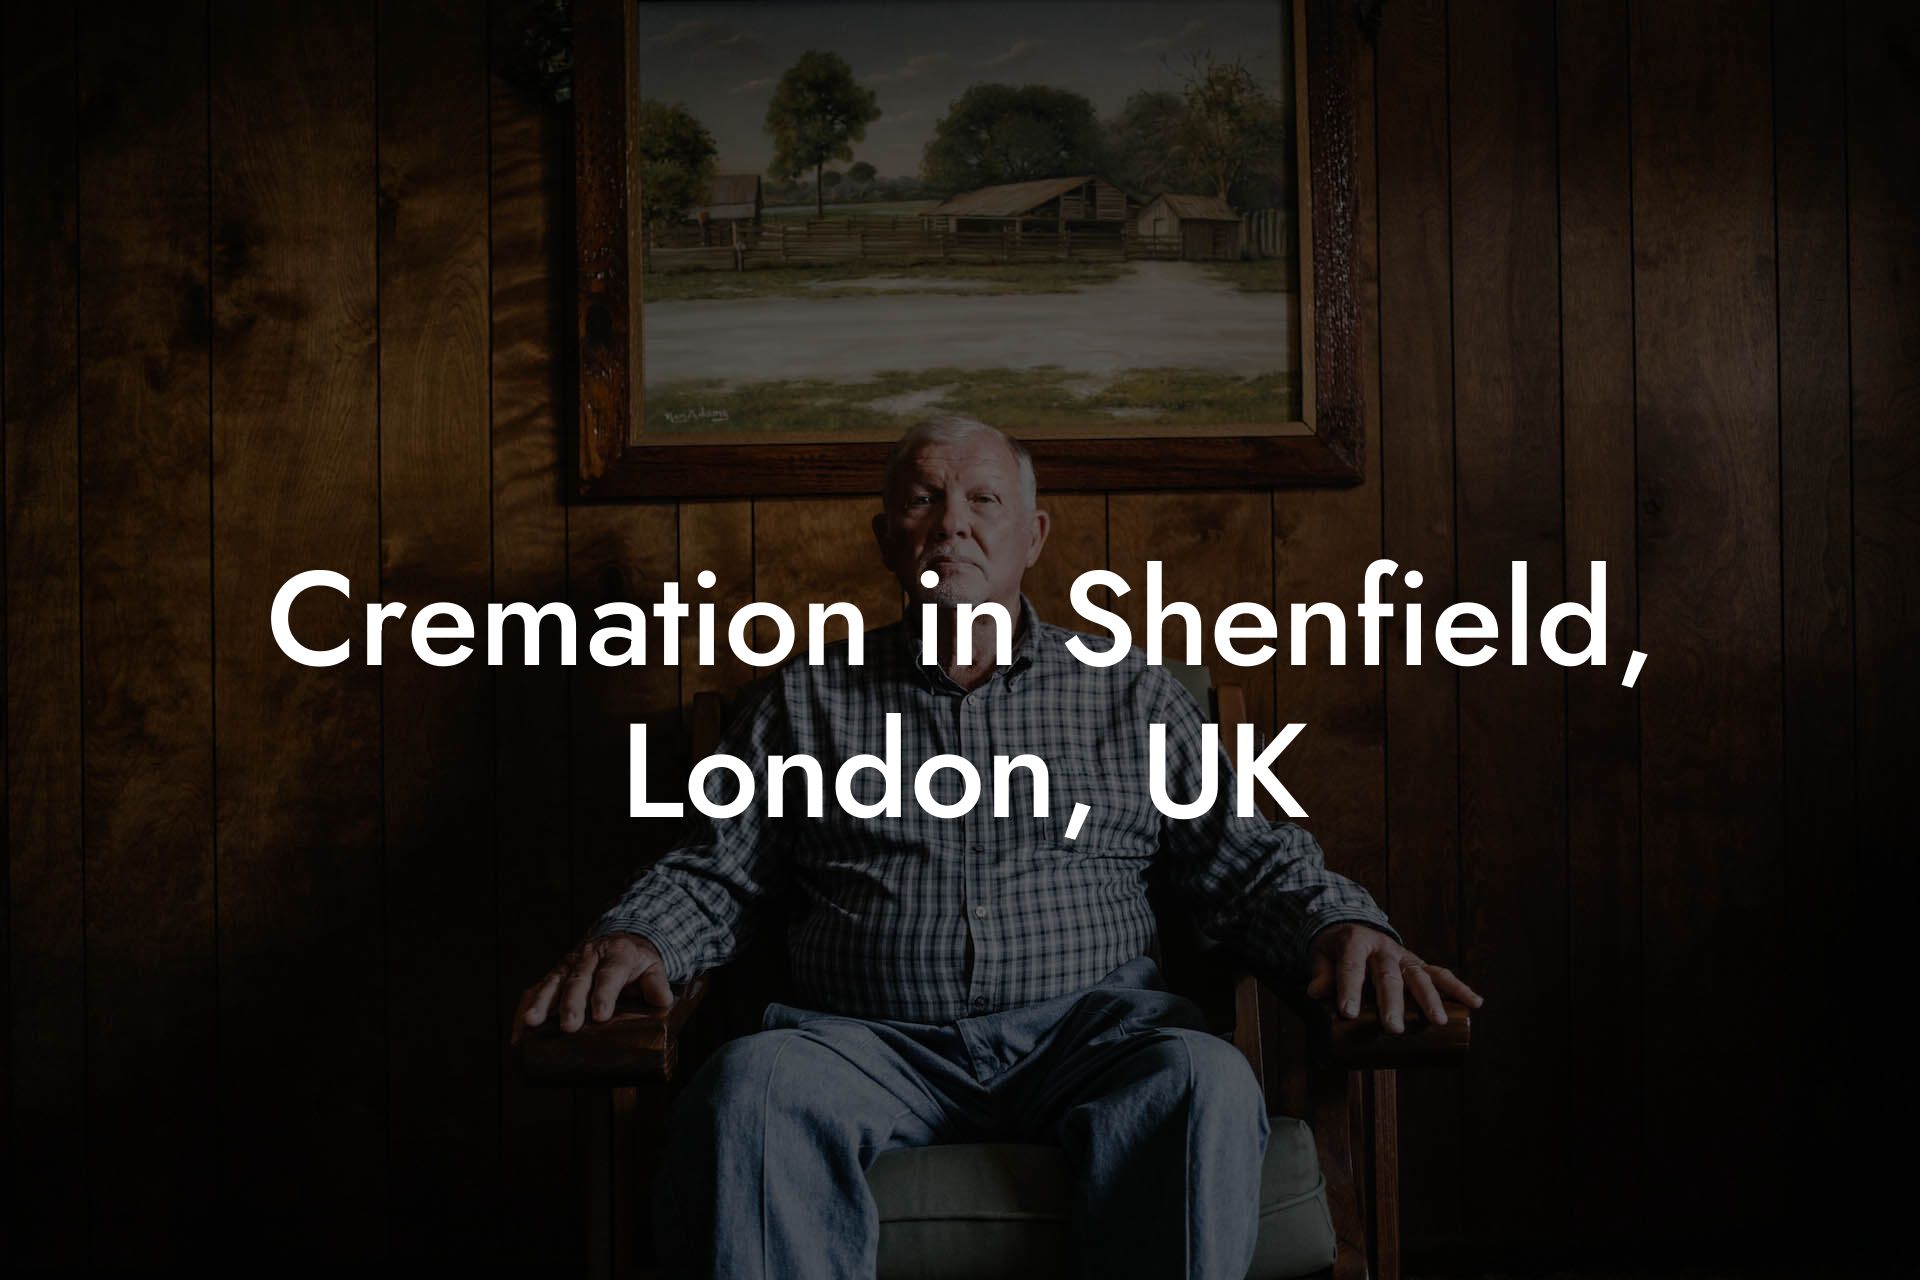 Cremation in Shenfield, London, UK